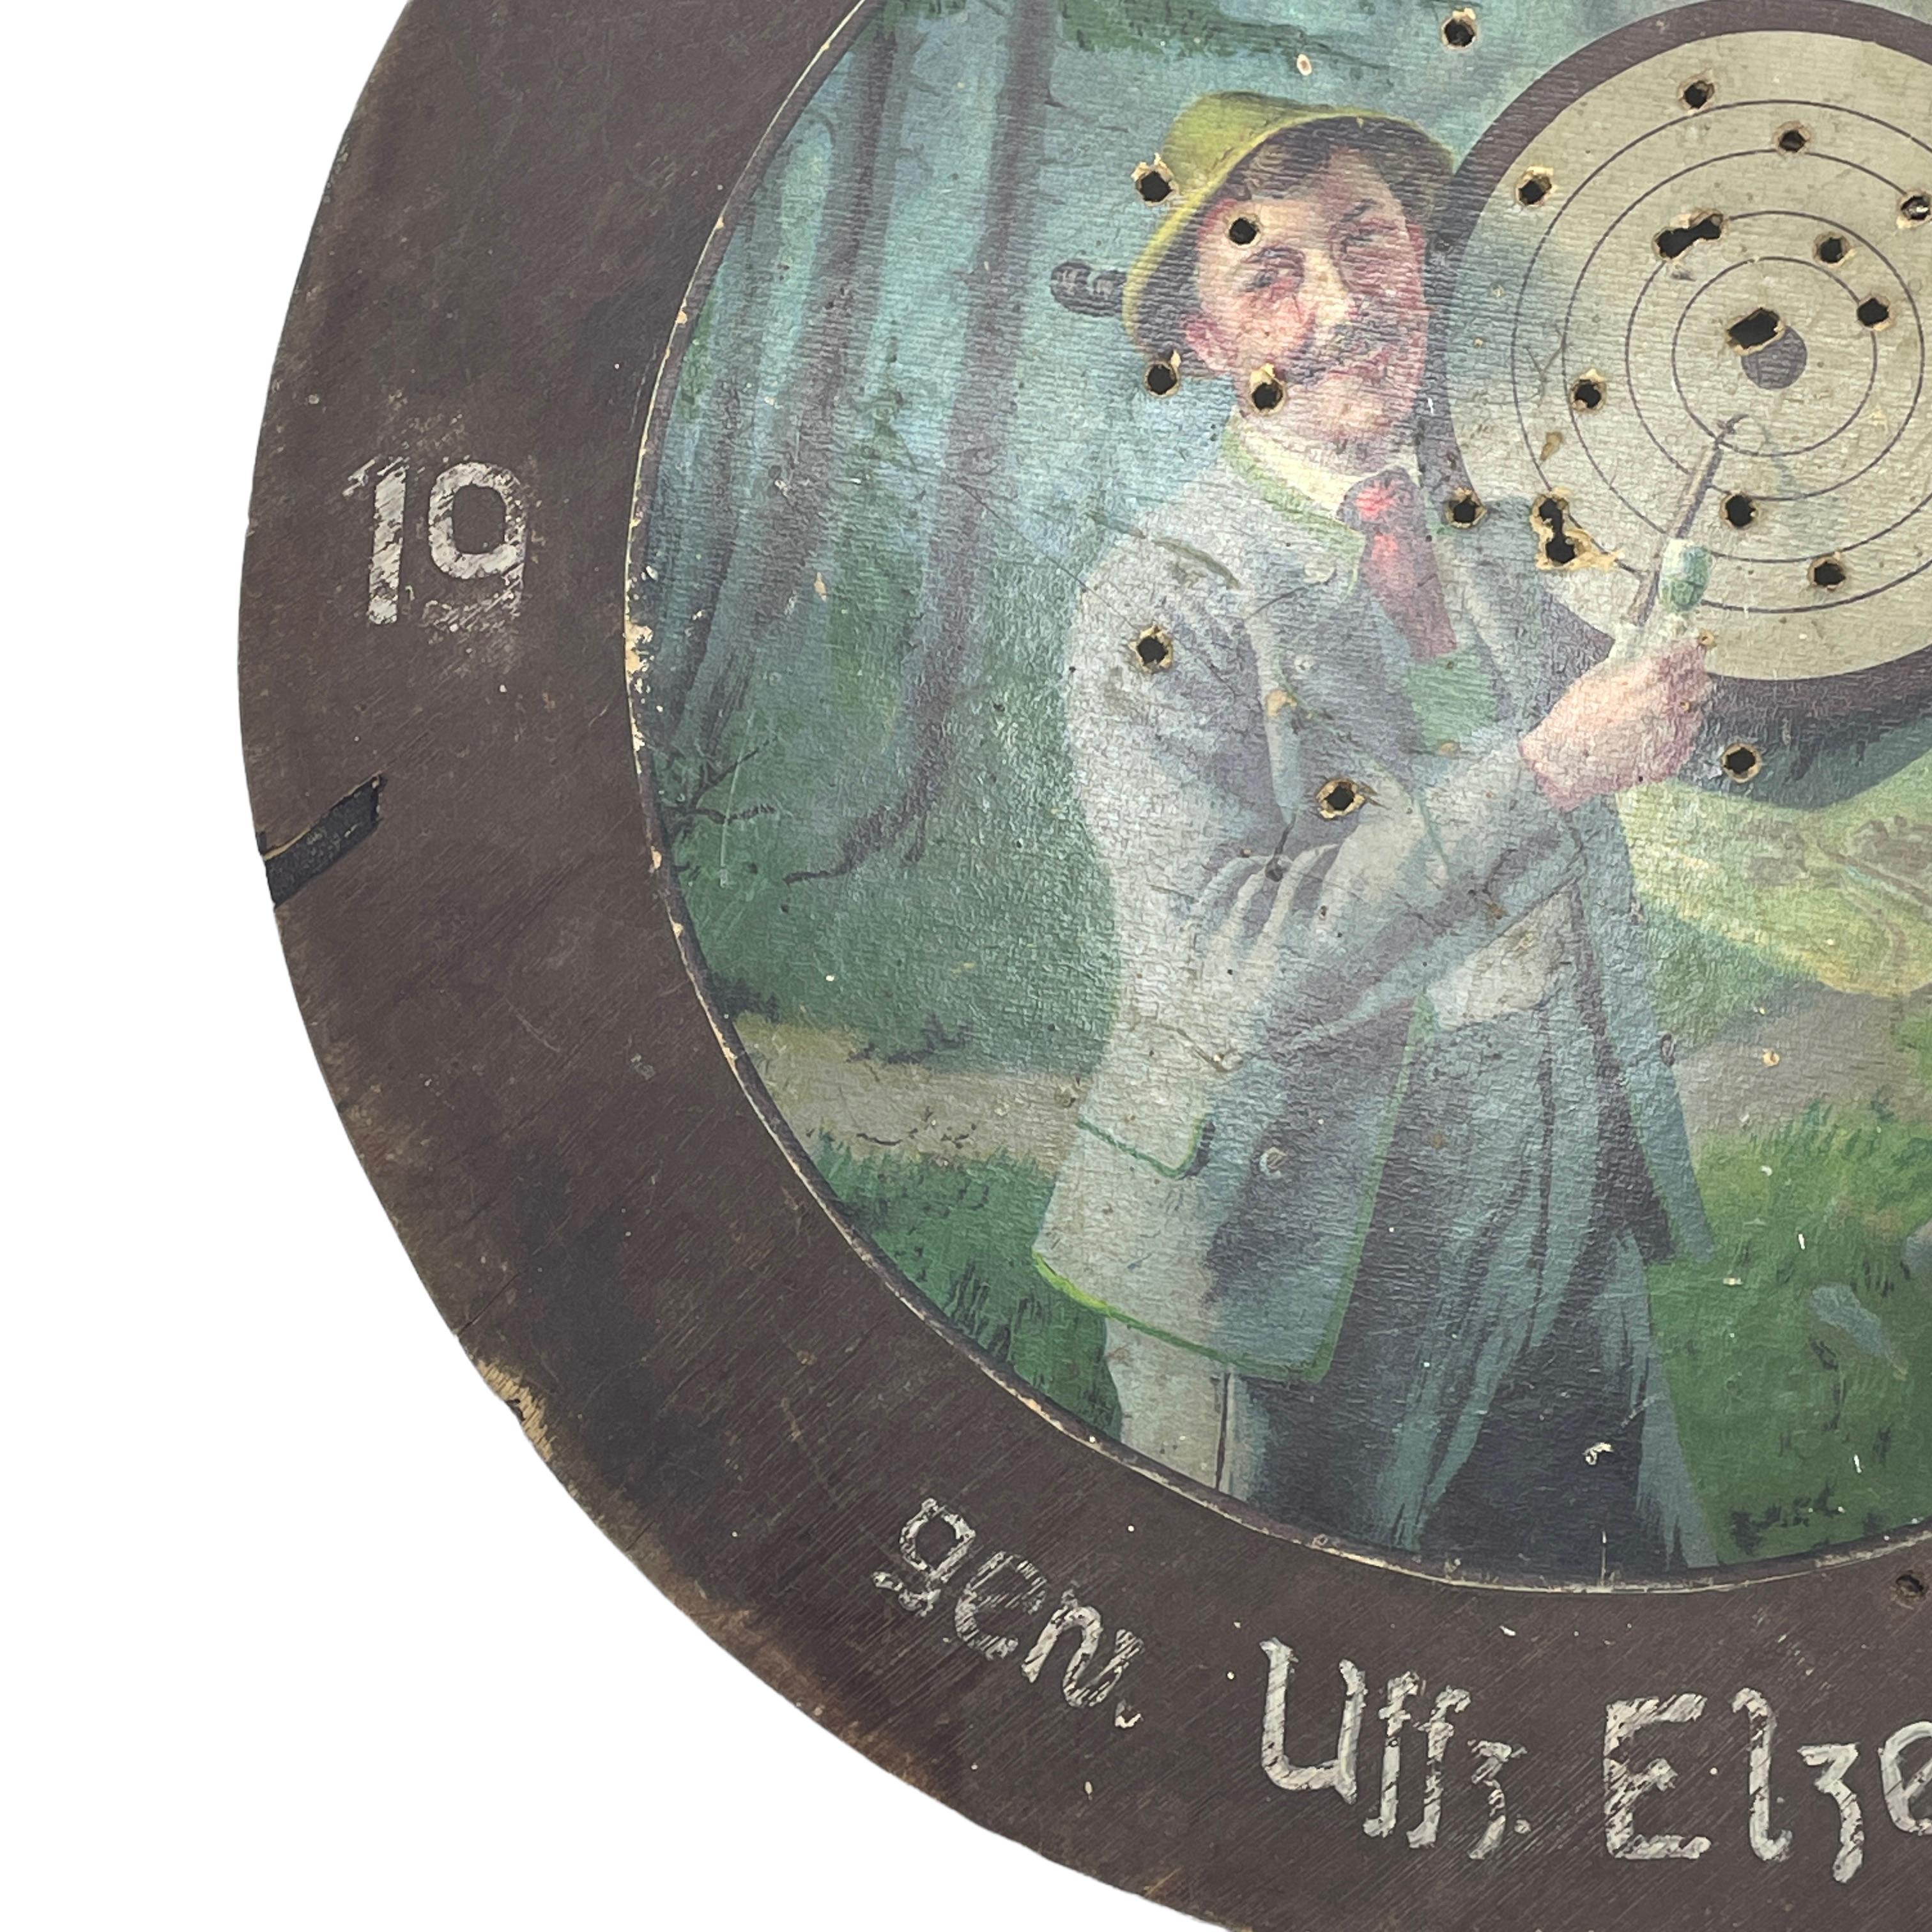 Vintage Shooting Lodge Target Plaque 1937.  A rare and beautiful wooden shooting target plaque with inscriptions. This rare kings plaque was issued by a shooting club in Germany in 1937. Inscribed with date, place and the names of the participants.